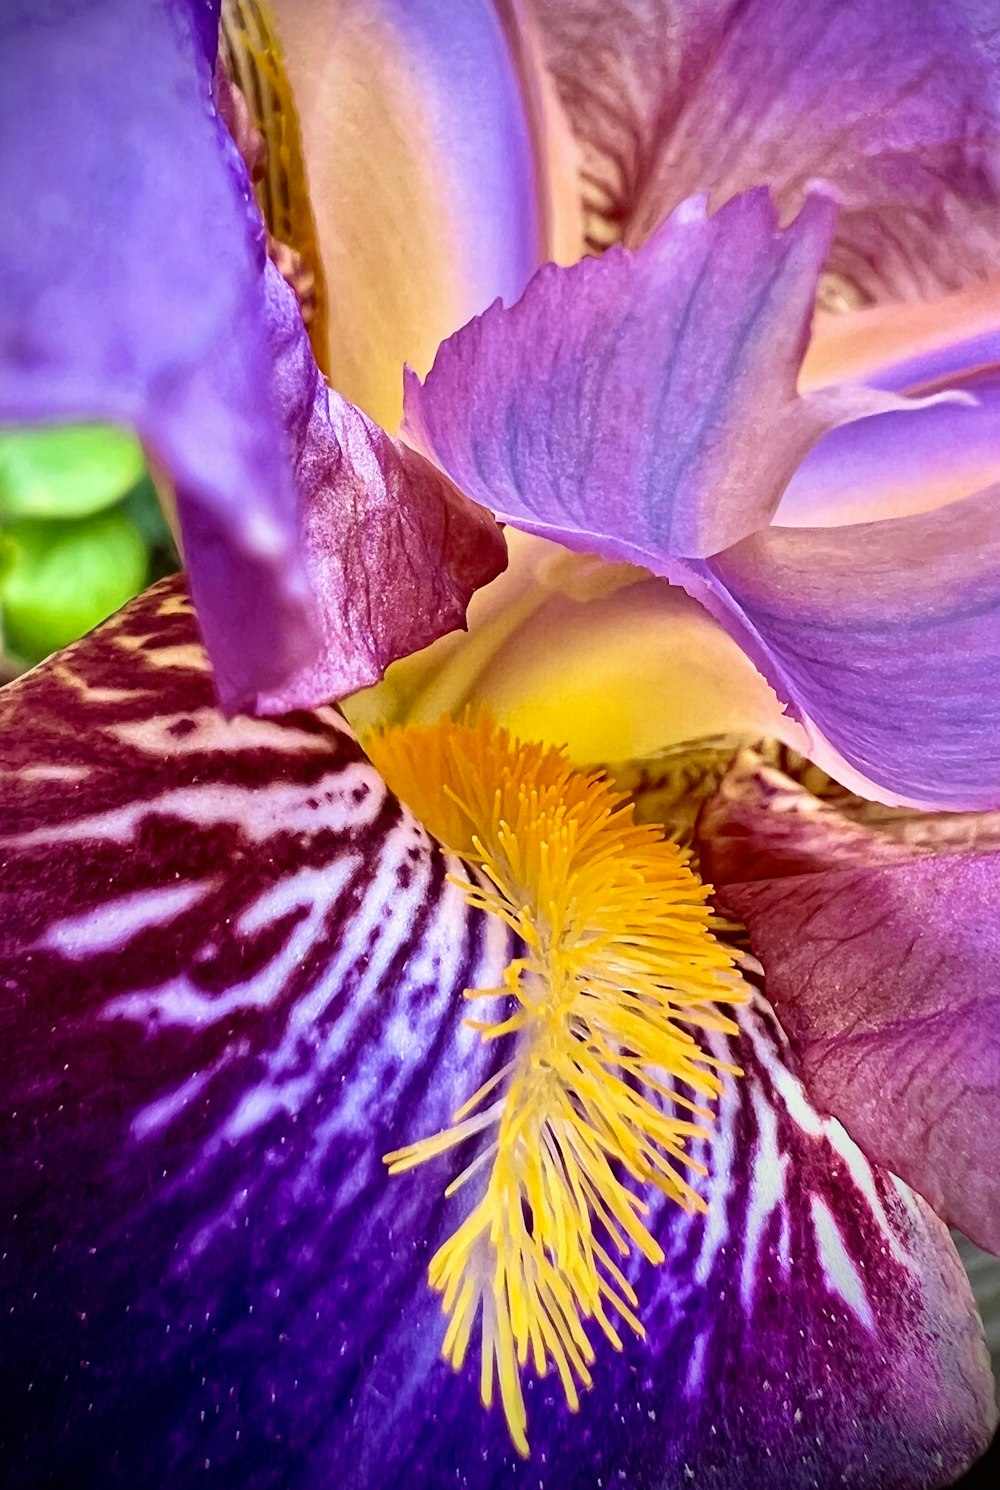 a close up of a purple flower